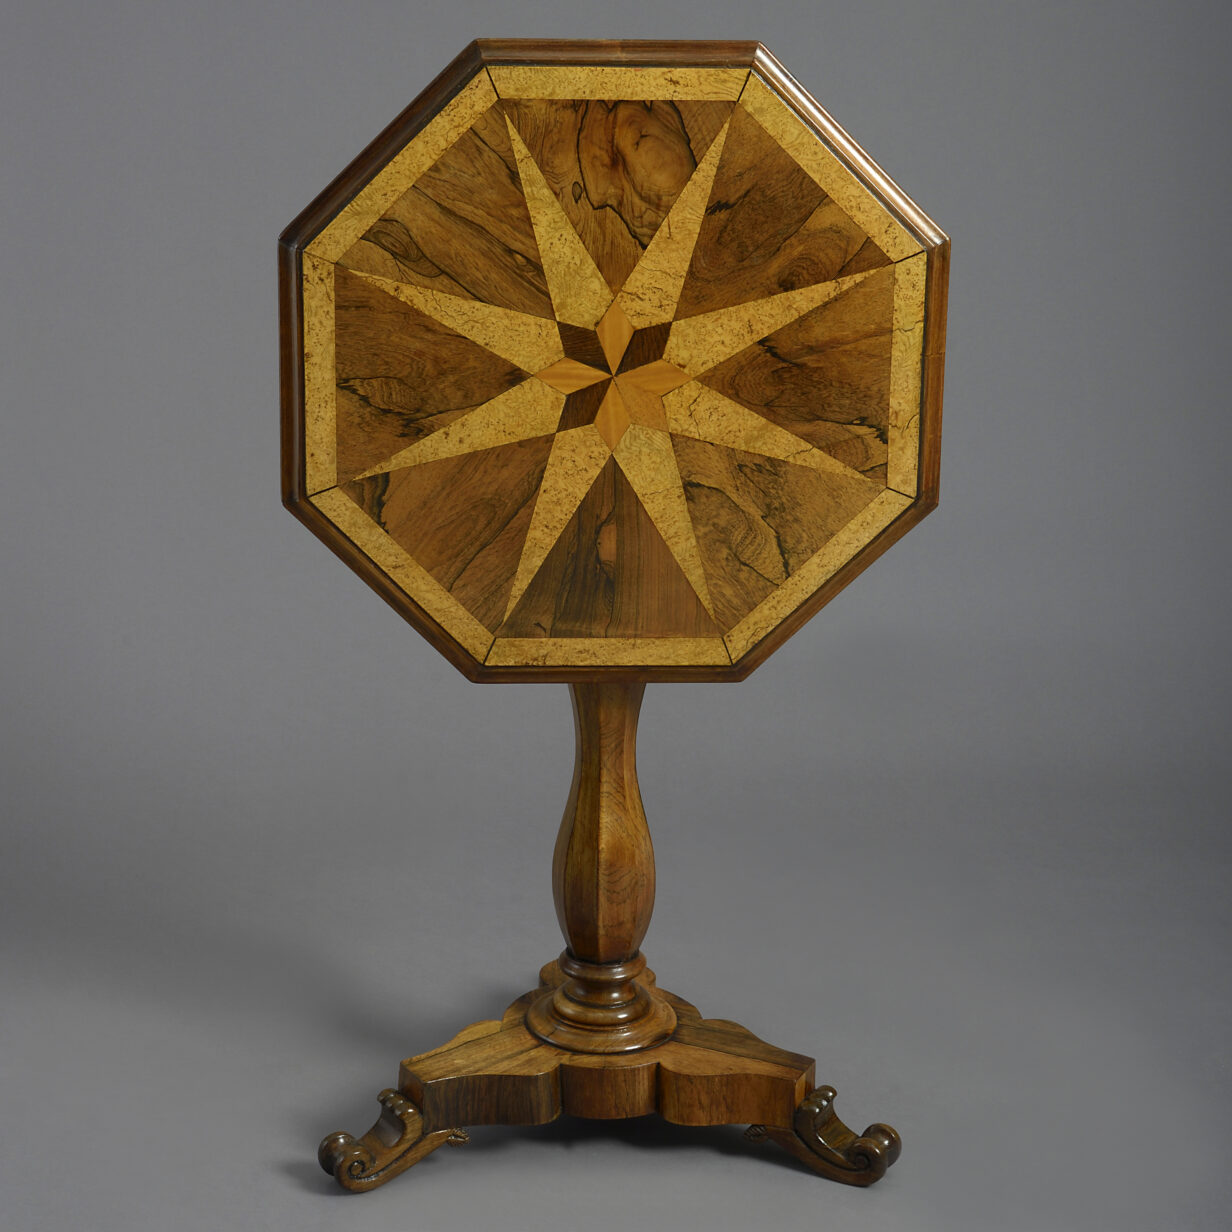 Parquetry occasional table